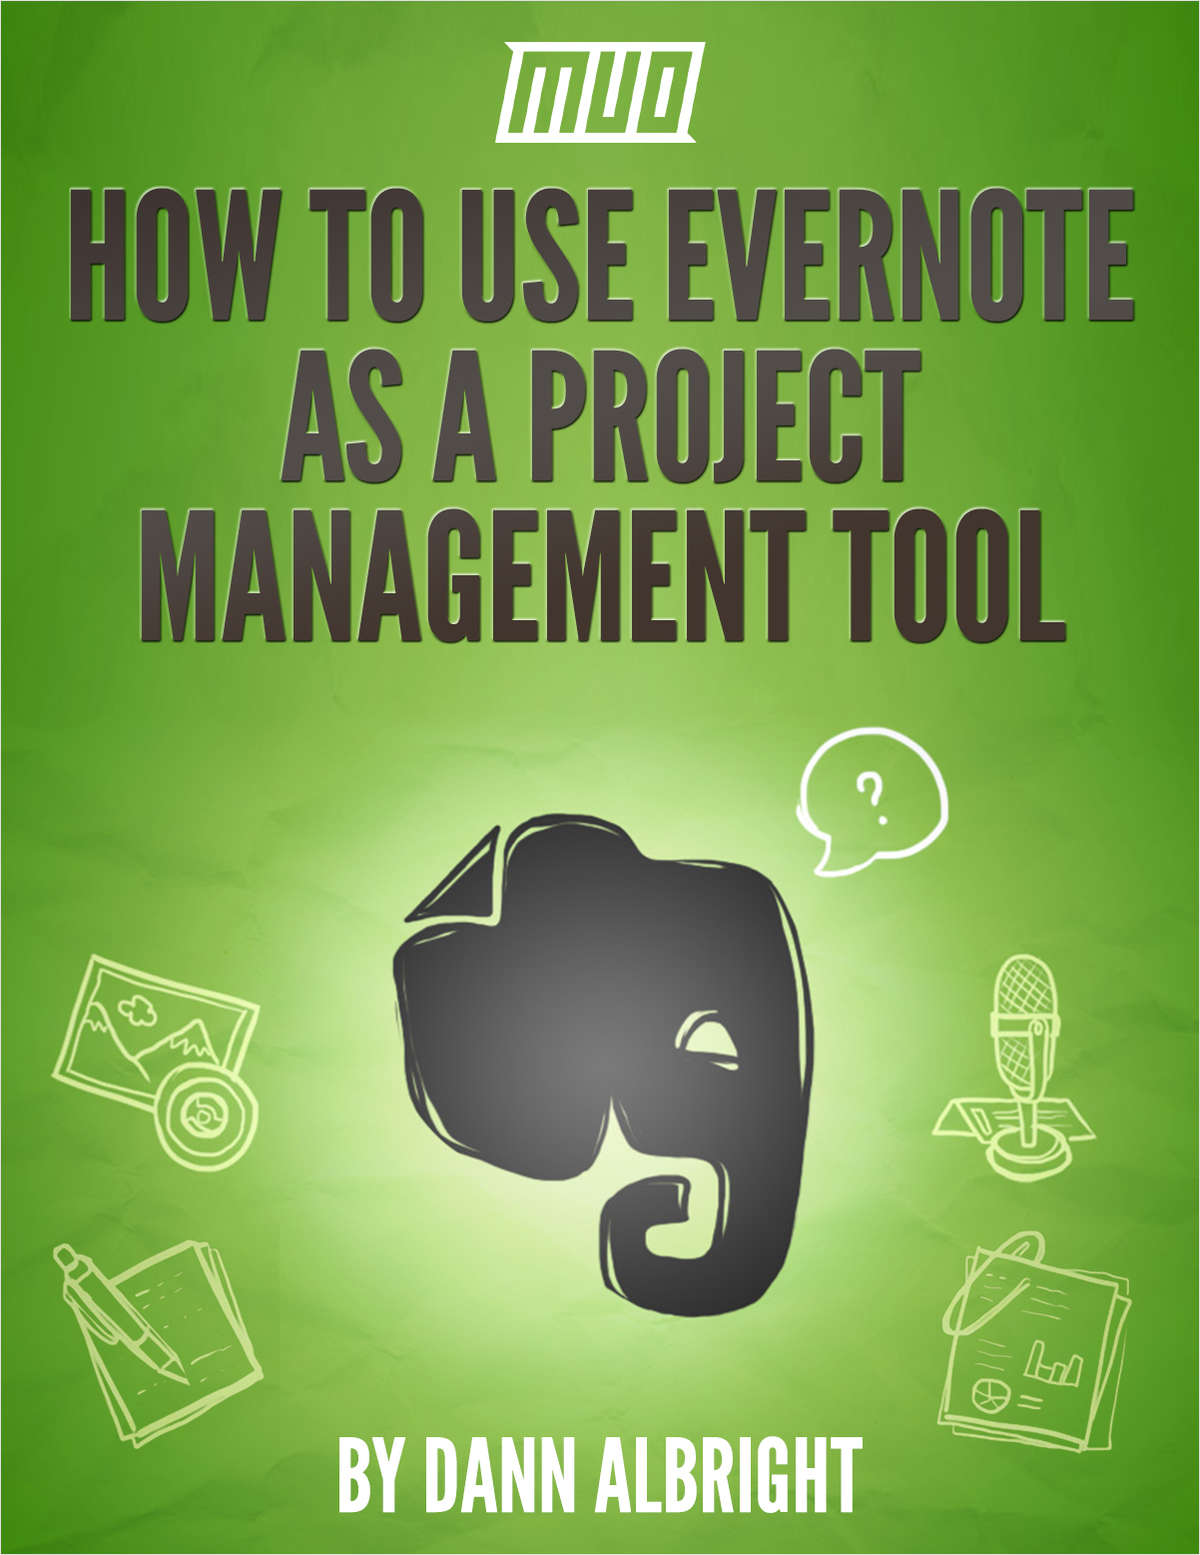 How to Use Evernote as a Project Management Tool Free MakeUseOf Tips